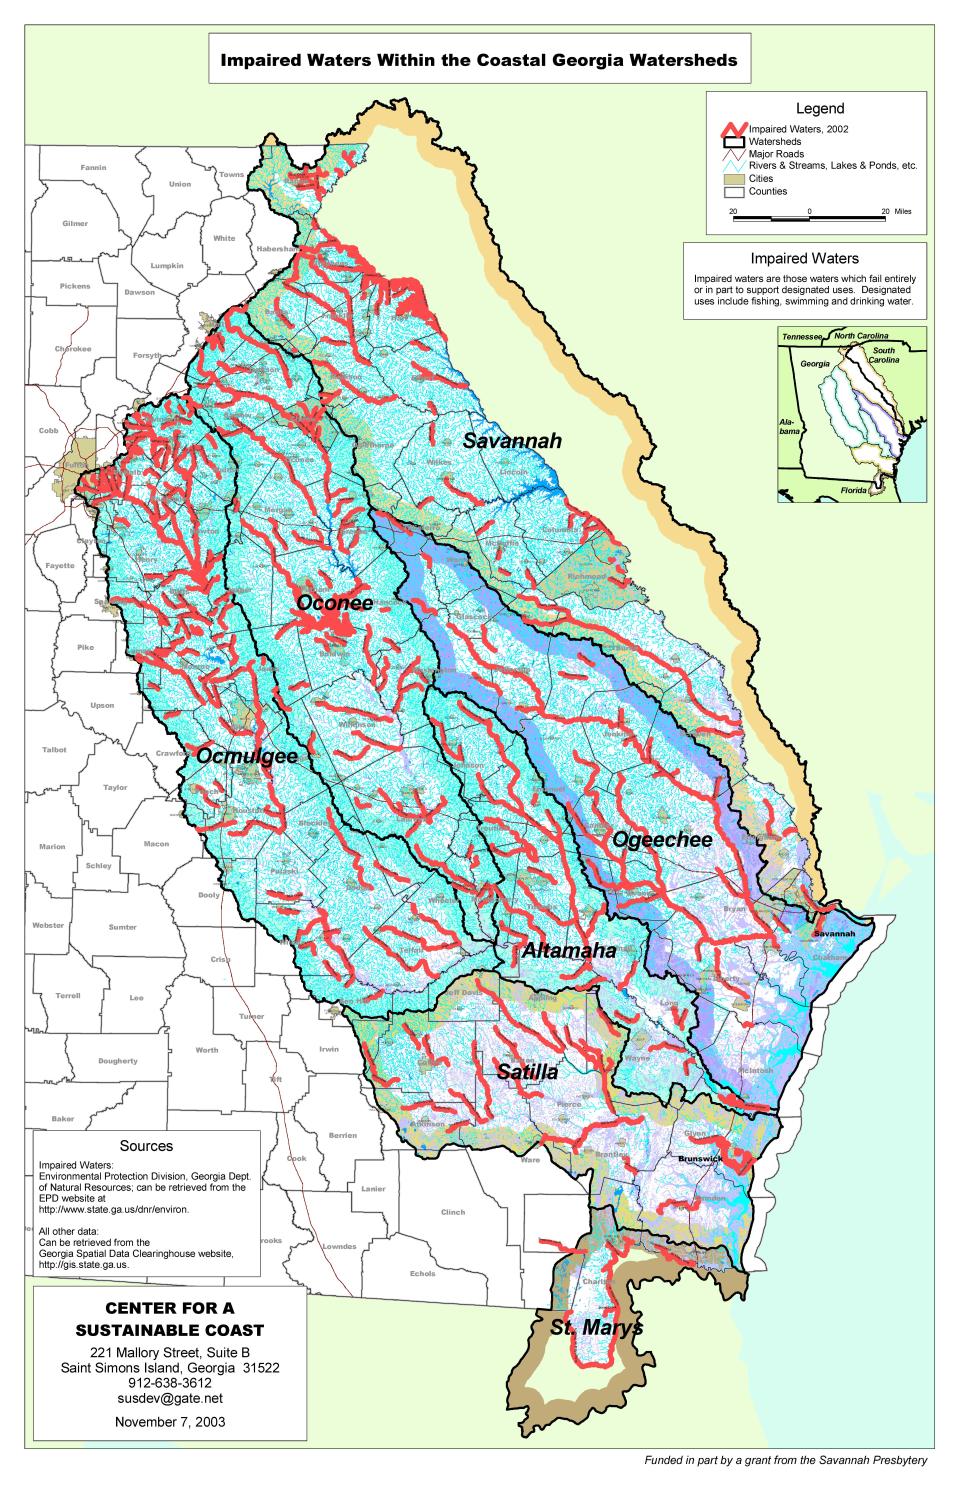 A map of impaired waters within the coastal Georgia watersheds.